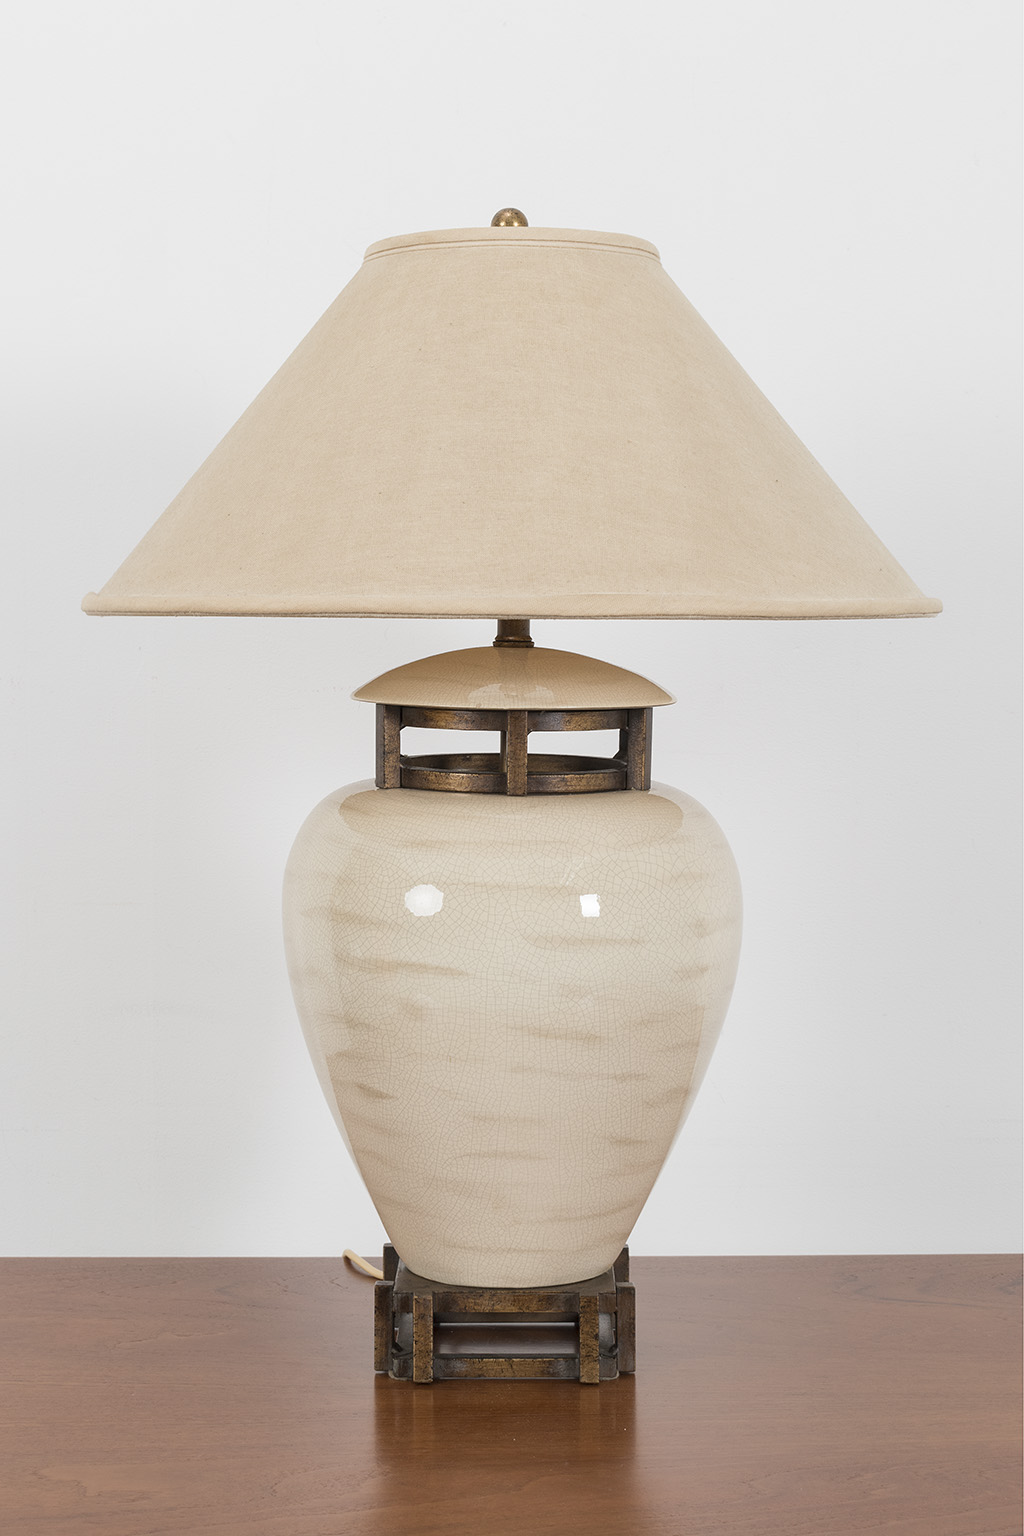 Ceramic table lamp with classic shapes